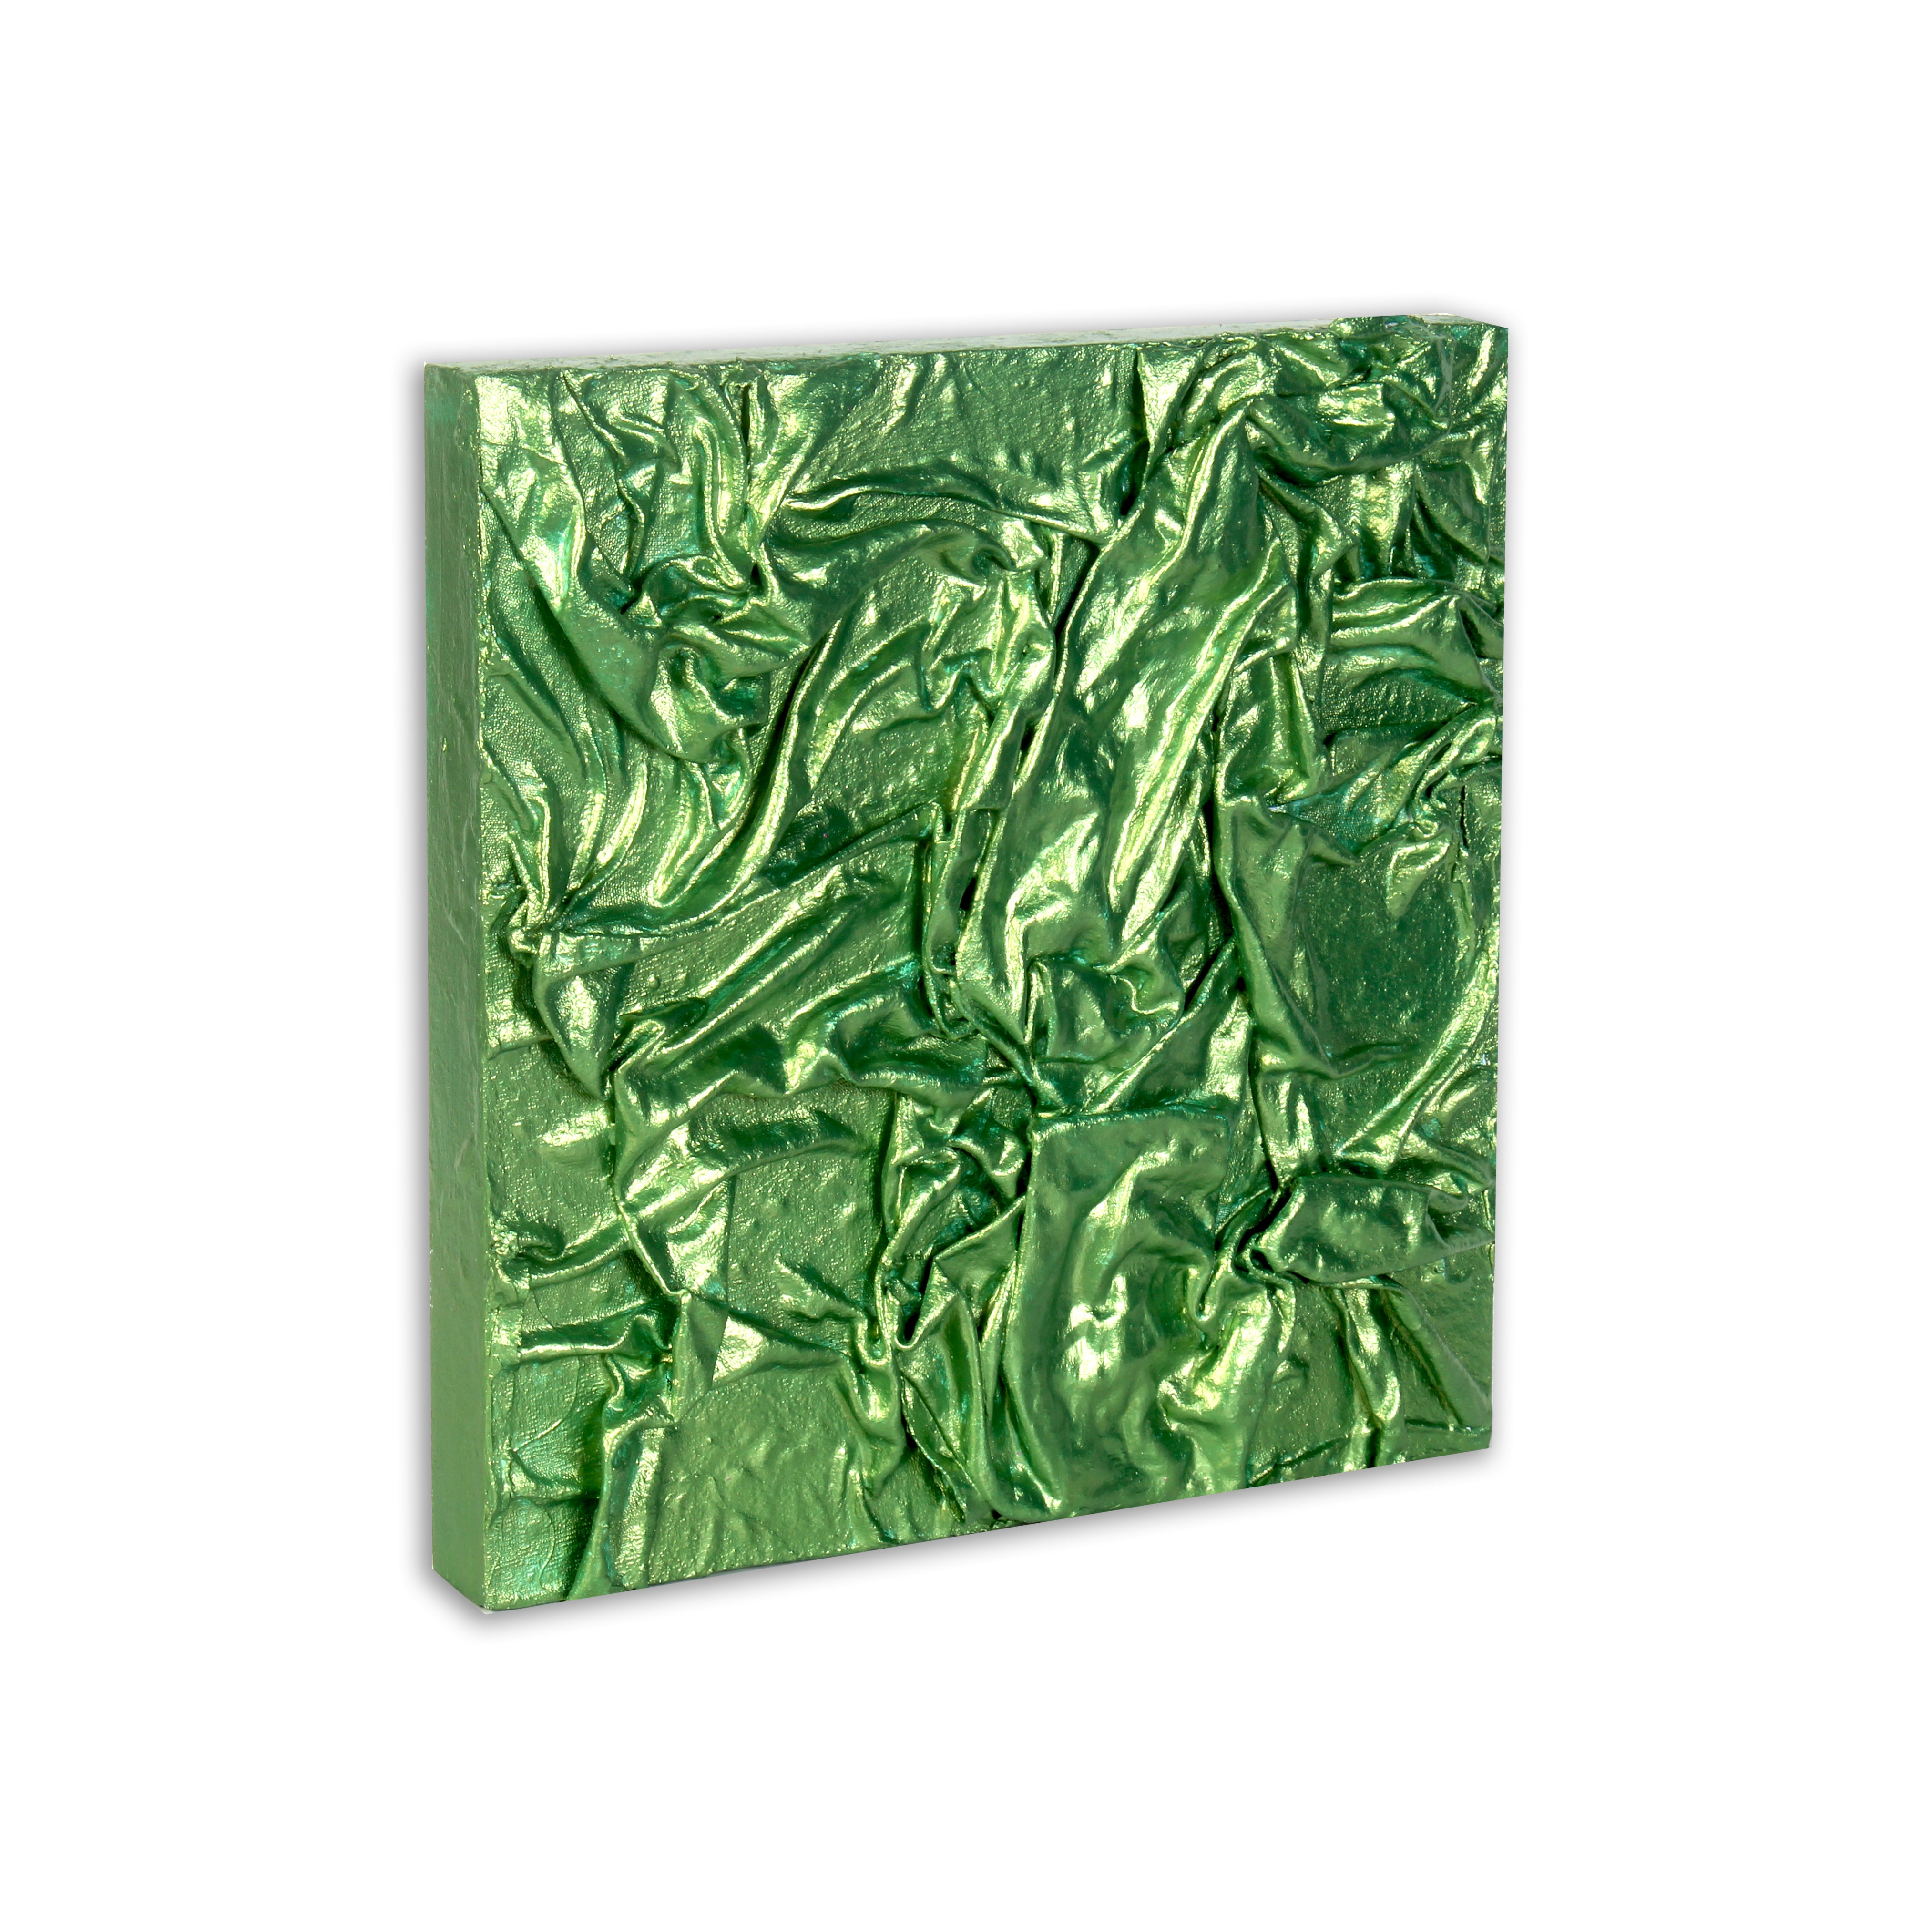 Wall Decor Faux Leather Art Green Sheen Approx H12 X L12 X D0.78inch 1pc